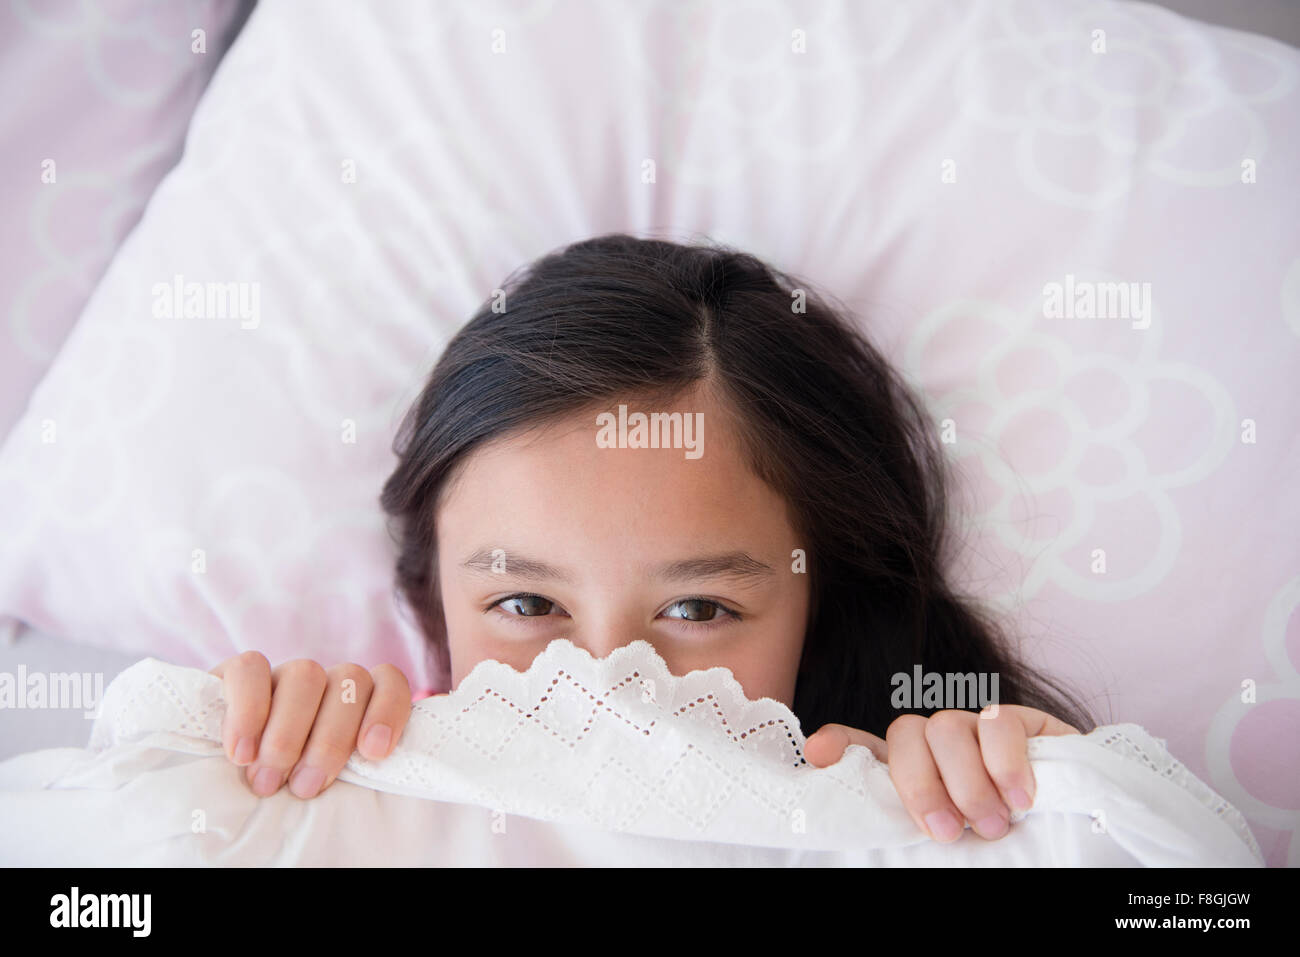 Girl peeking out from bed blankets Stock Photo